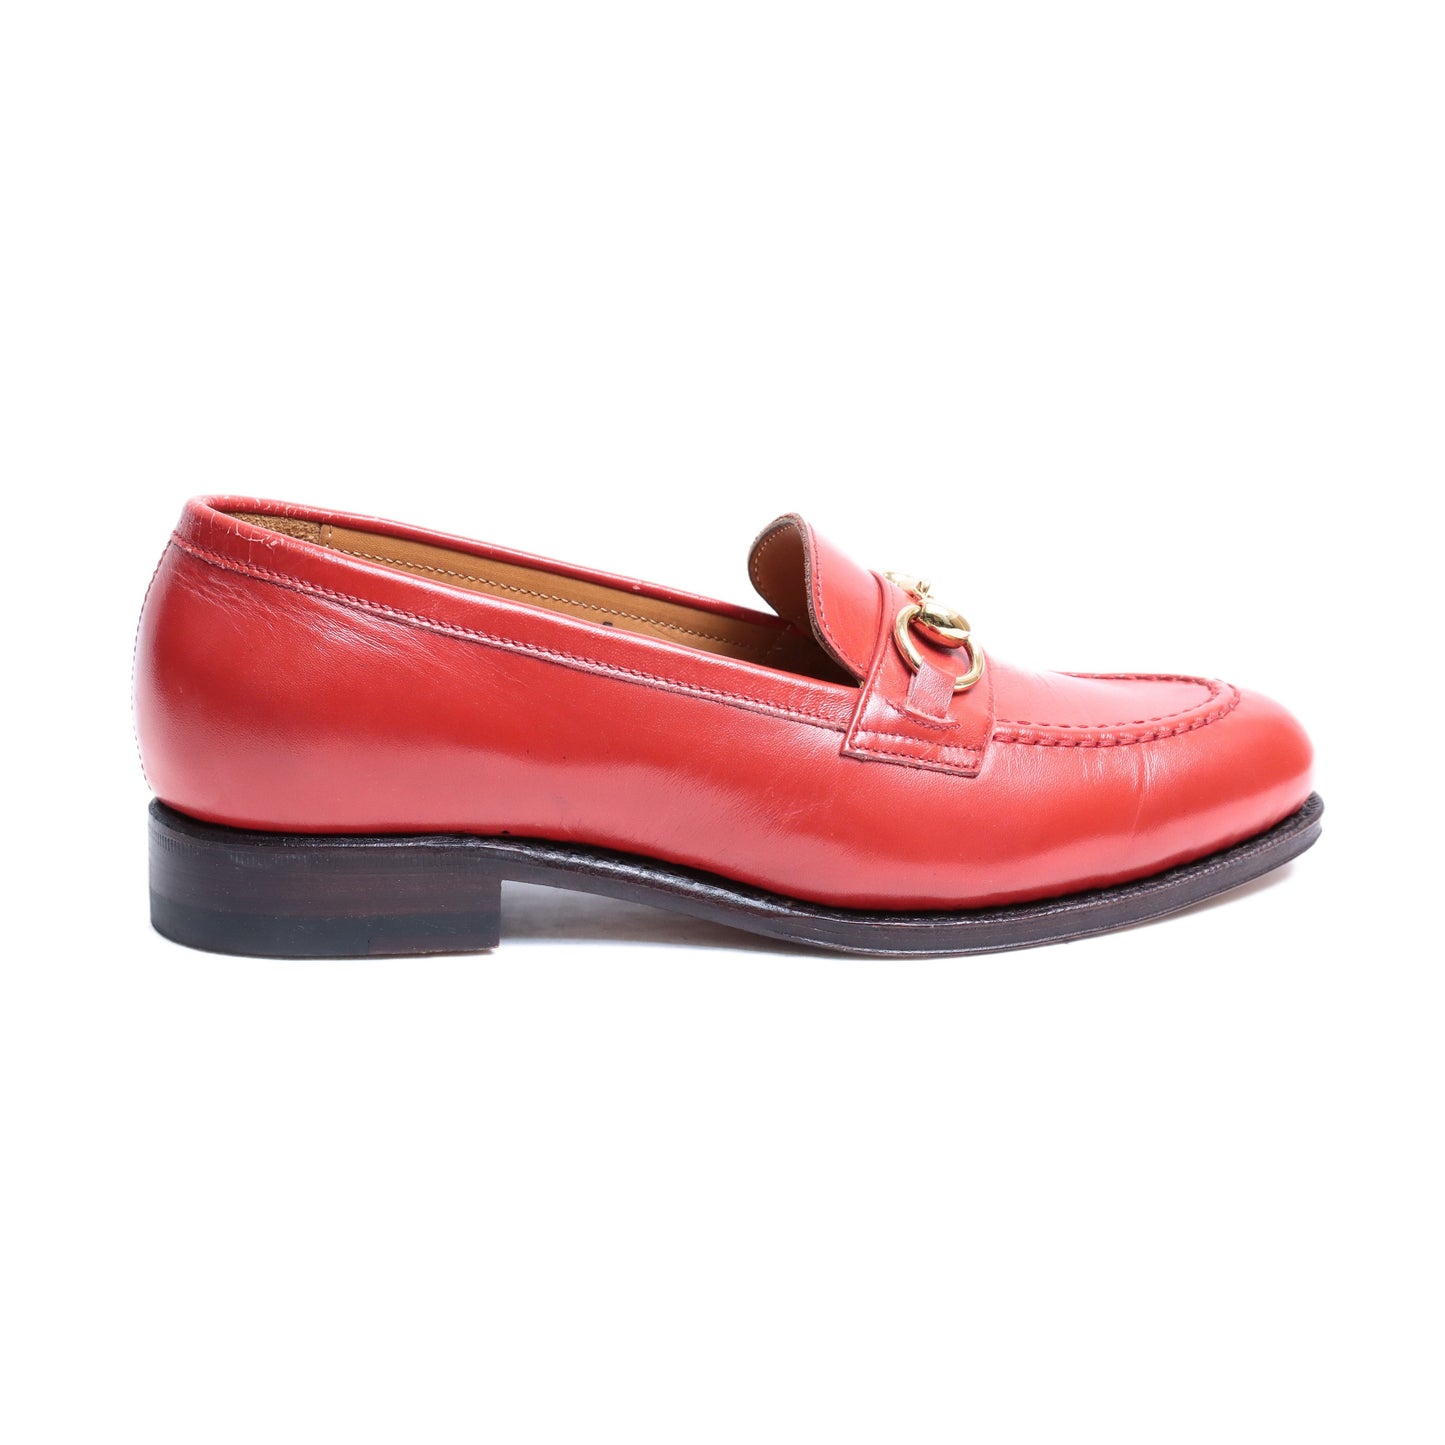 98689 / CALF / RED / LEATHER SOLE / UK5.0(24.0cm)